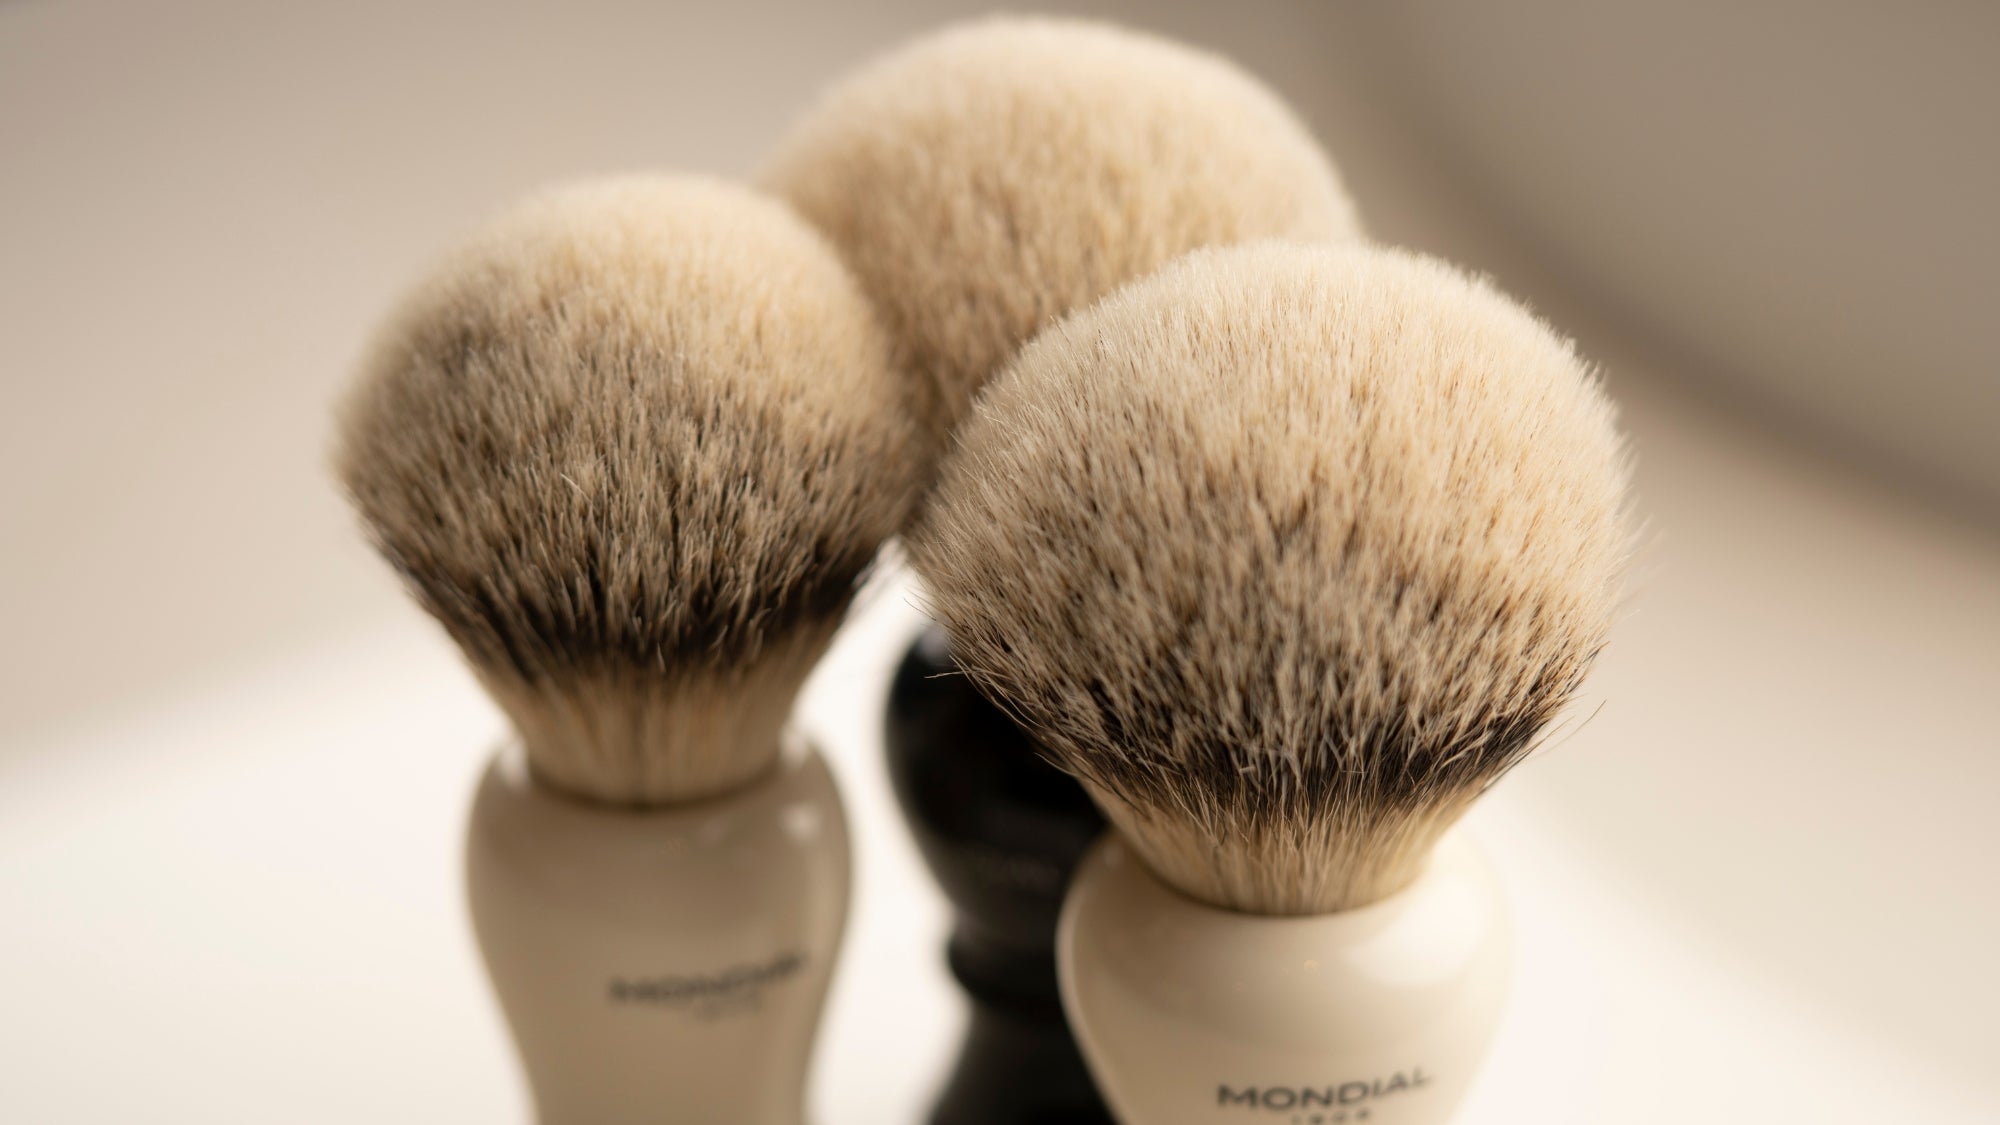 Shaving Brushes with Pure Badger Knot